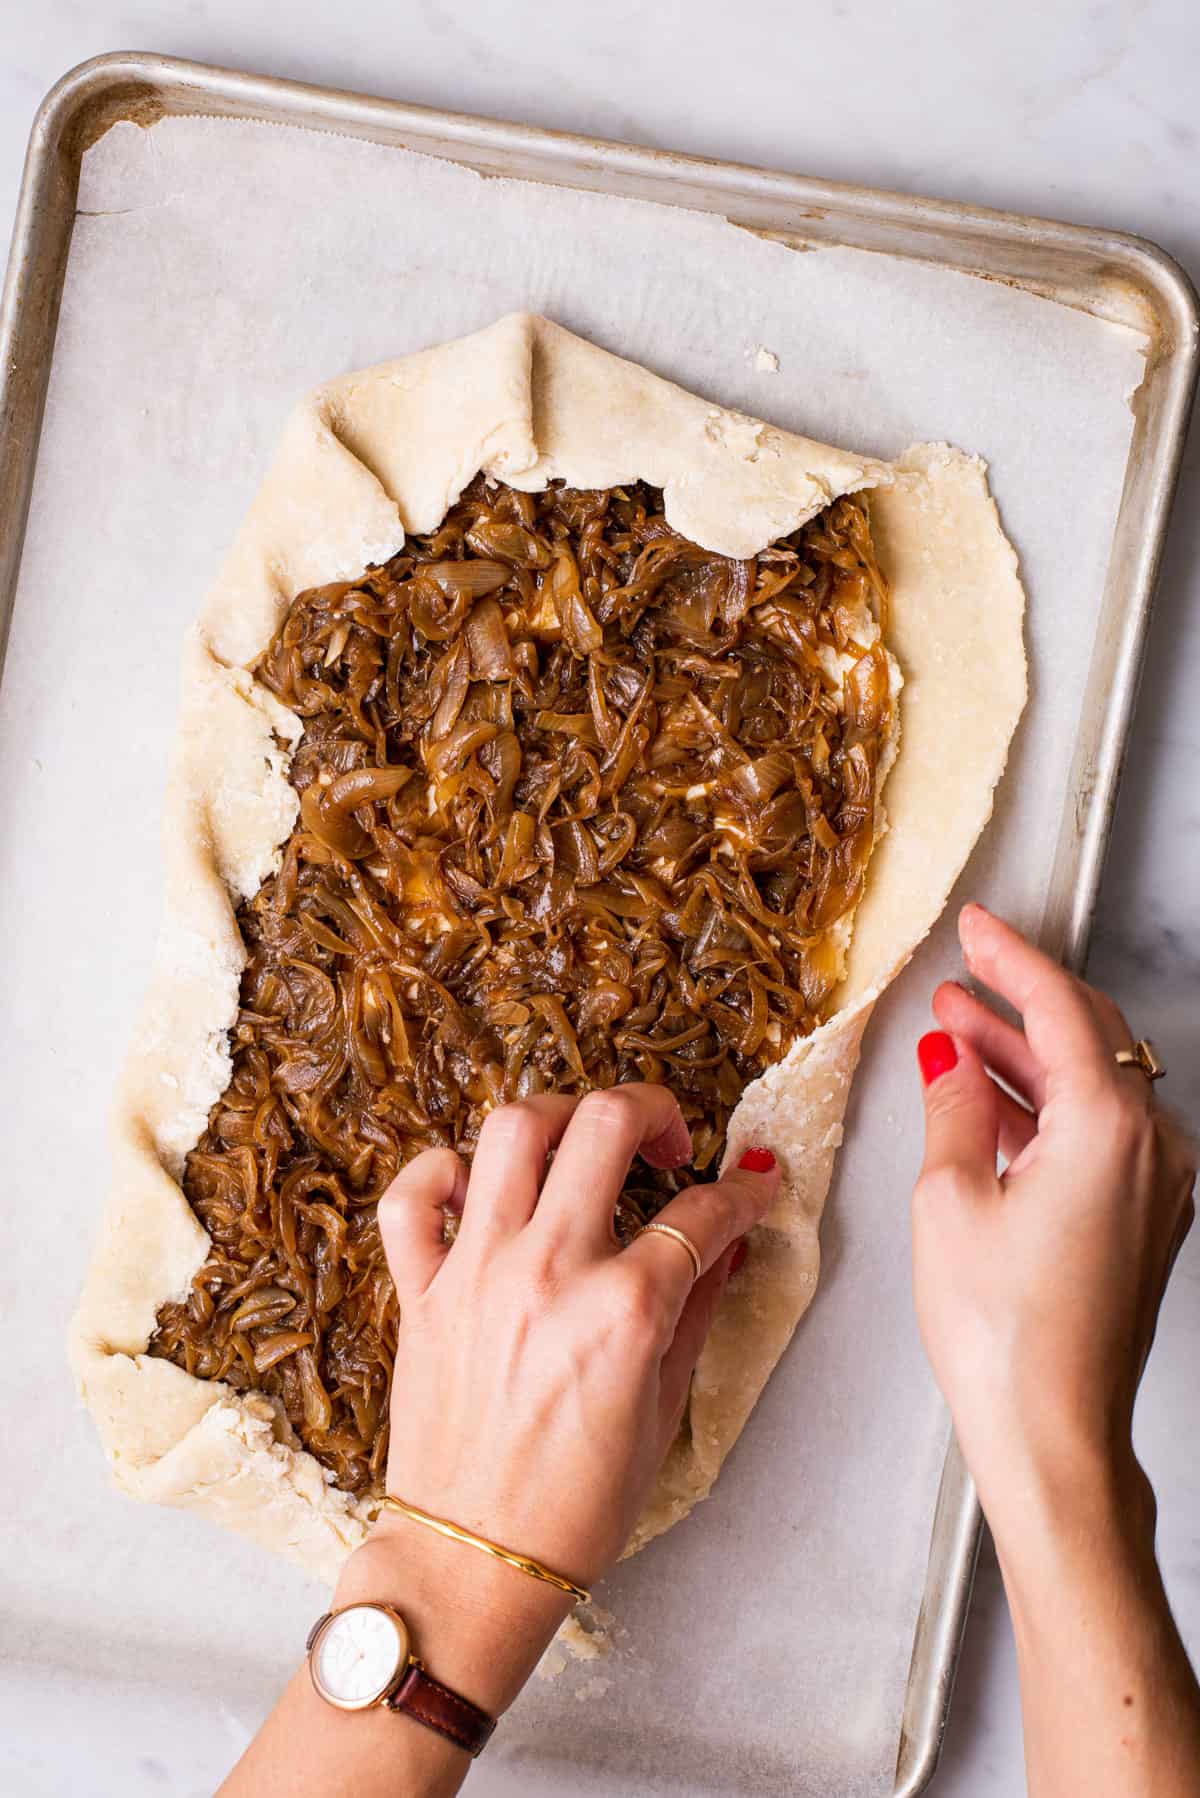 Woman's hands folding border of unbaked caramelized onion galette on a baking sheet.